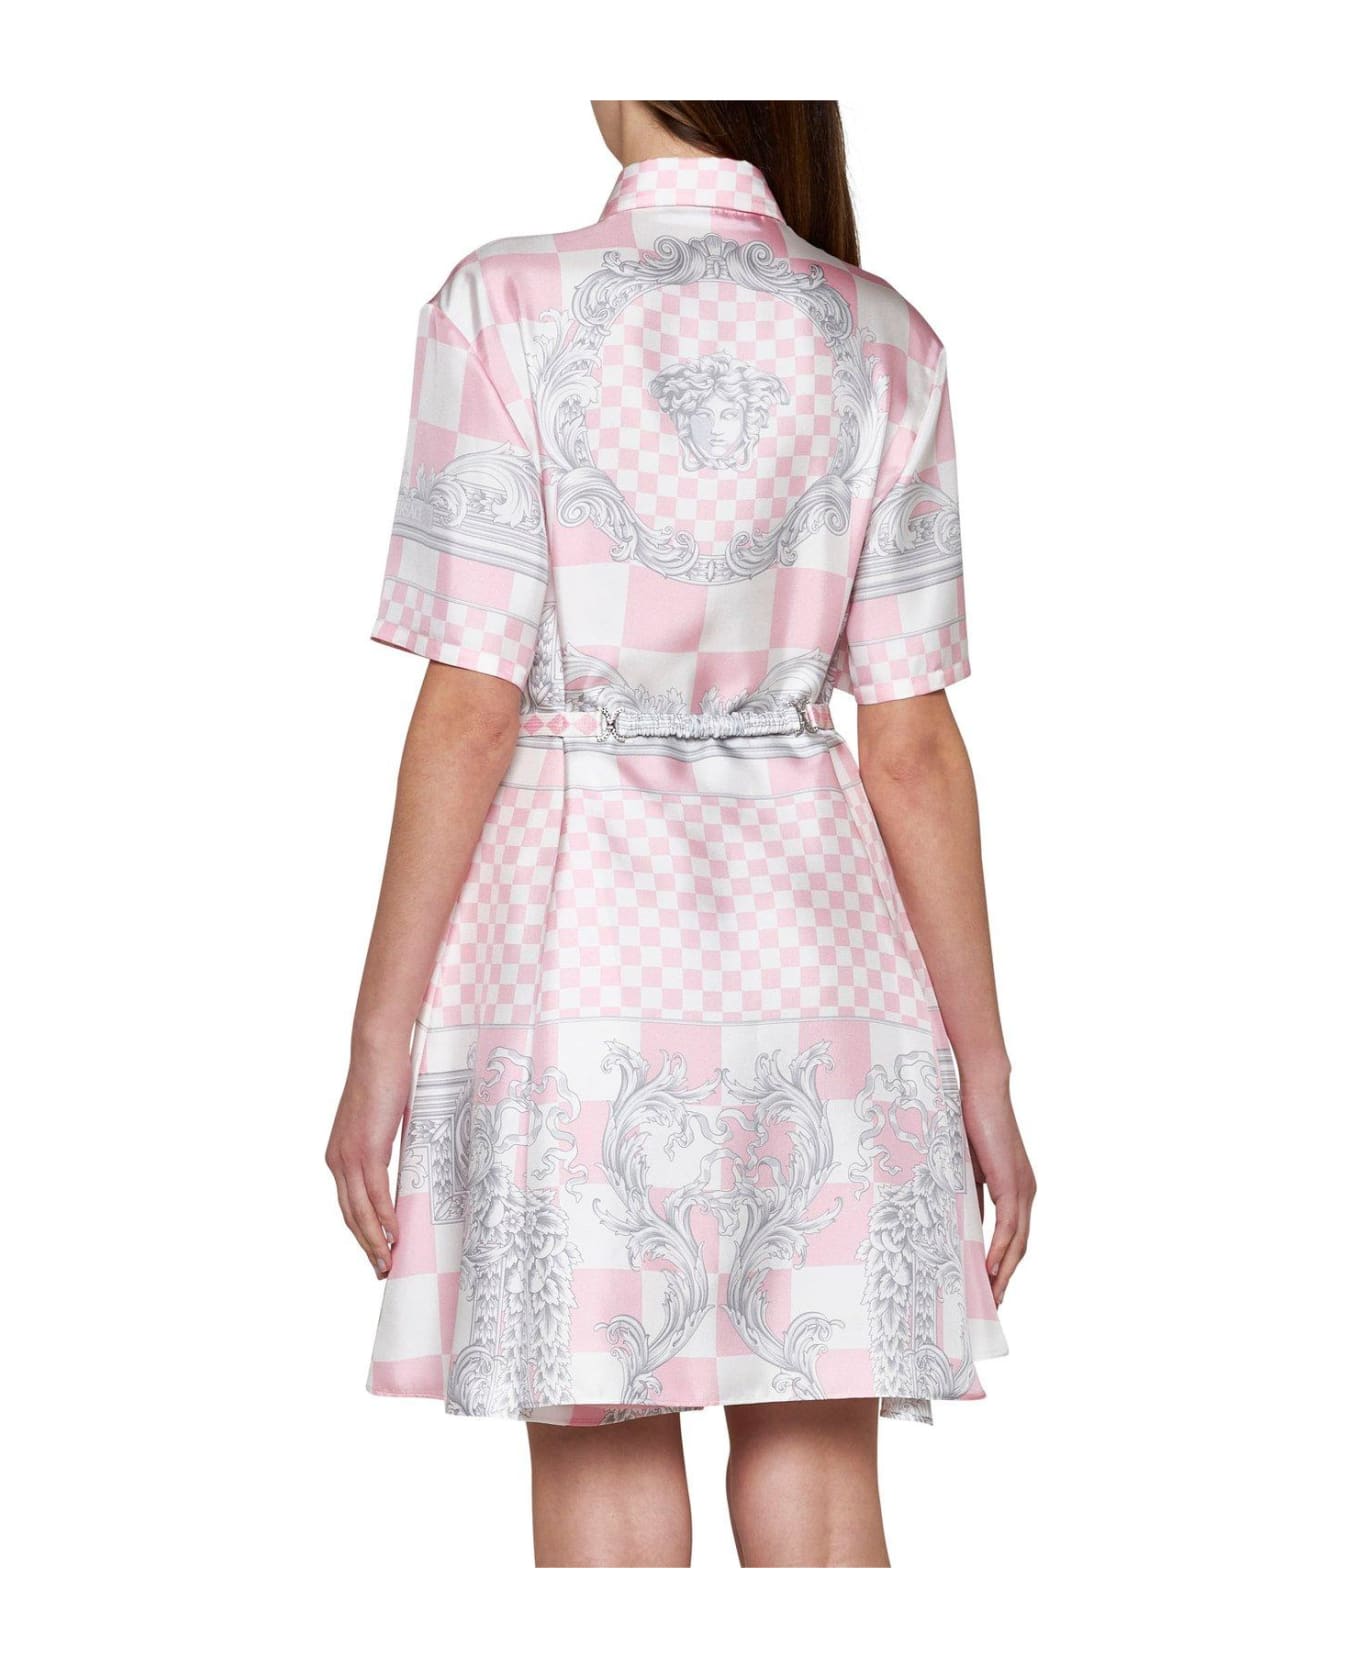 Versace Barocco-printed Belted Shirt Dress - Pastel pink + white + silver